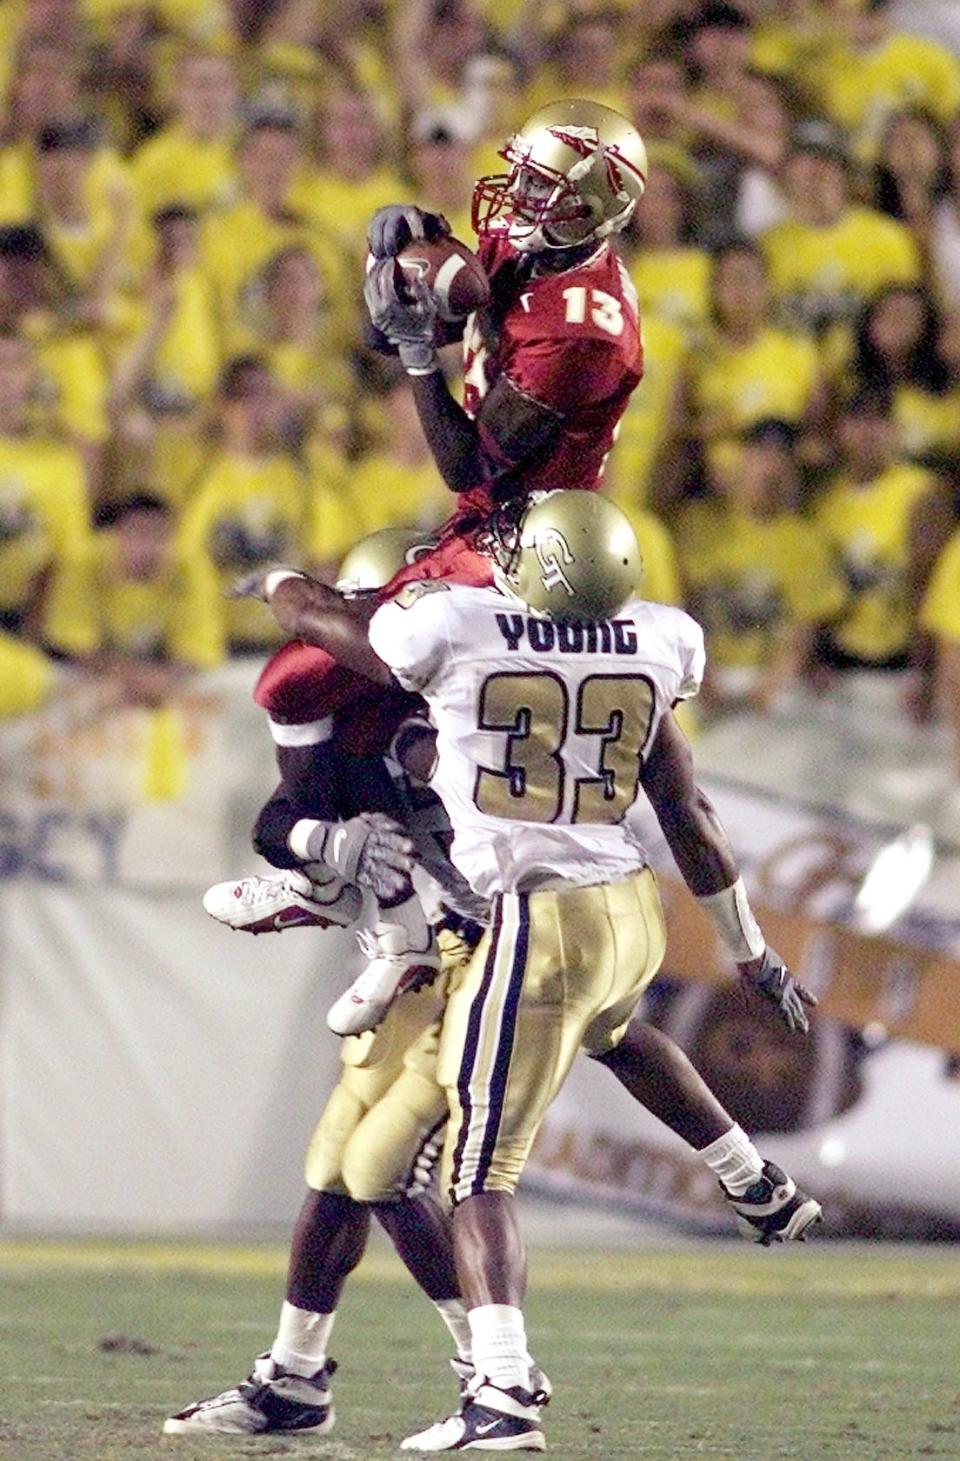 Marvin Minnis goes up over Ga. Tech's Chris Young to make the reception in the first quarter.